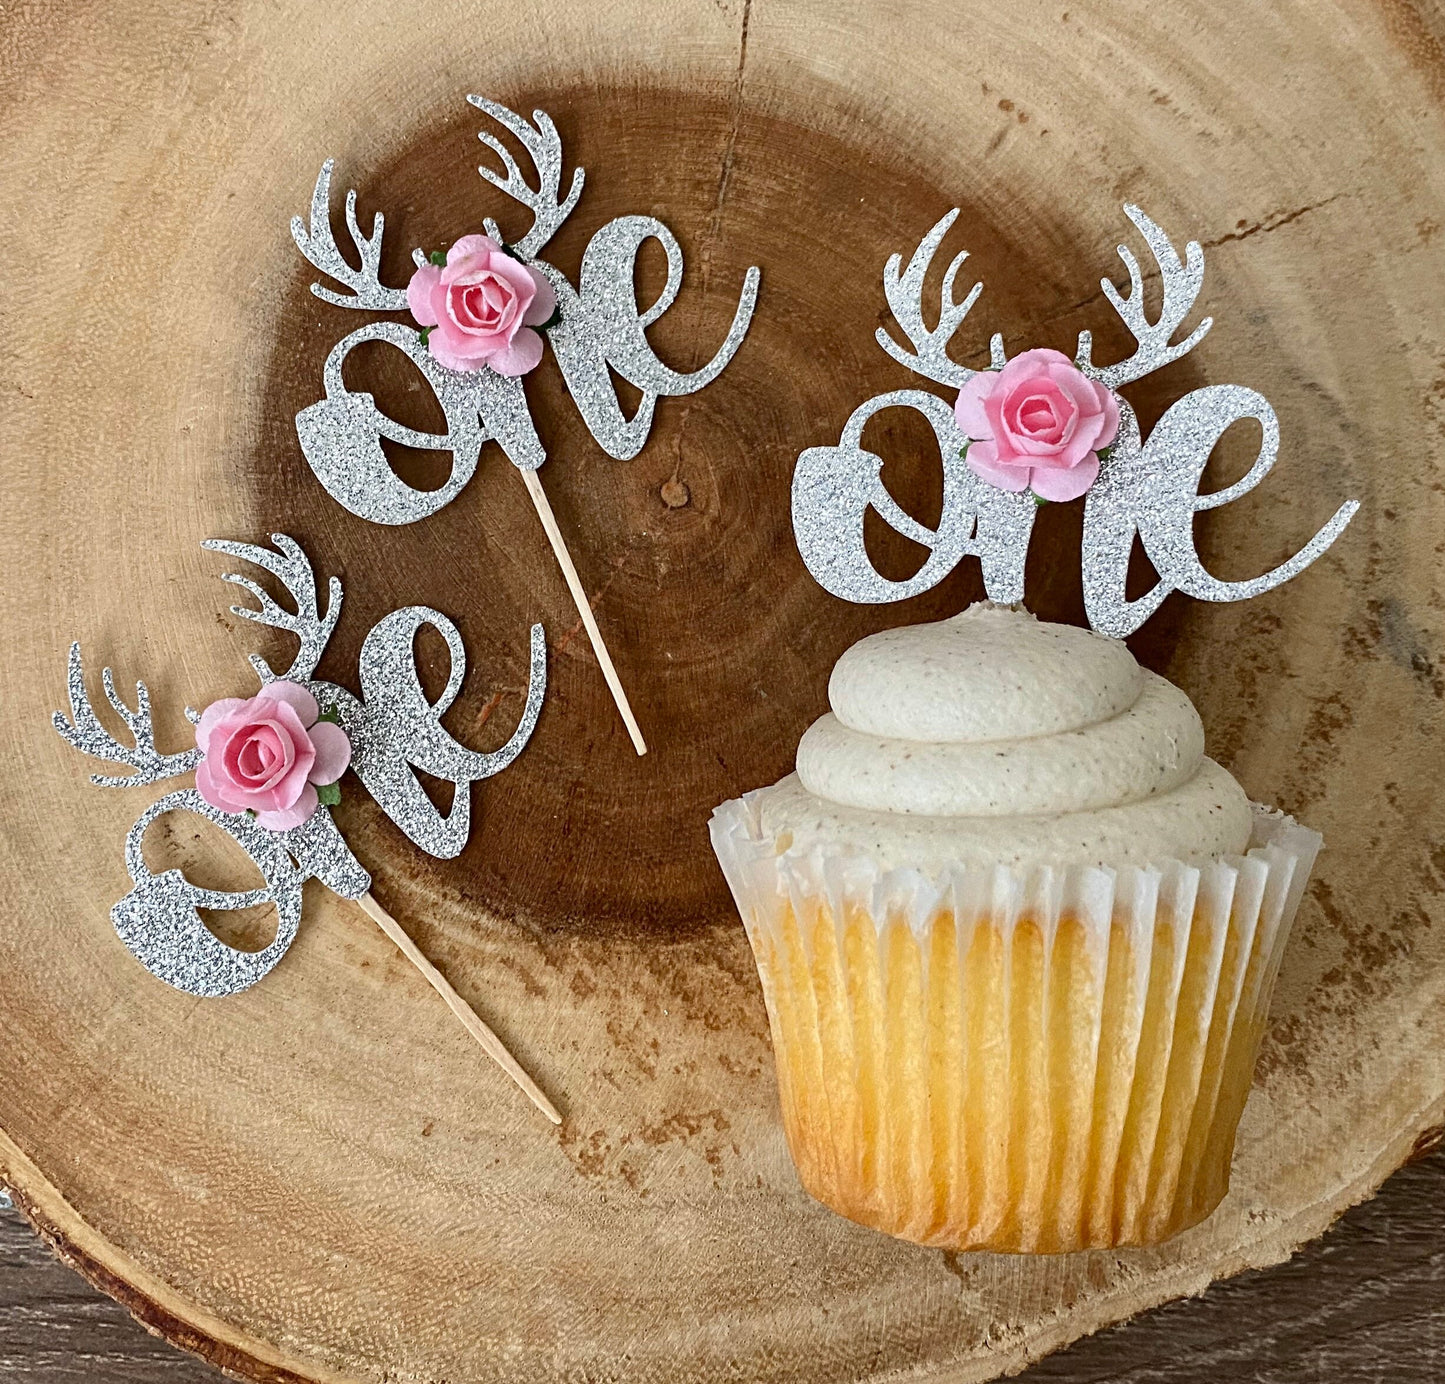 ONE CUPCAKE TOPPERS